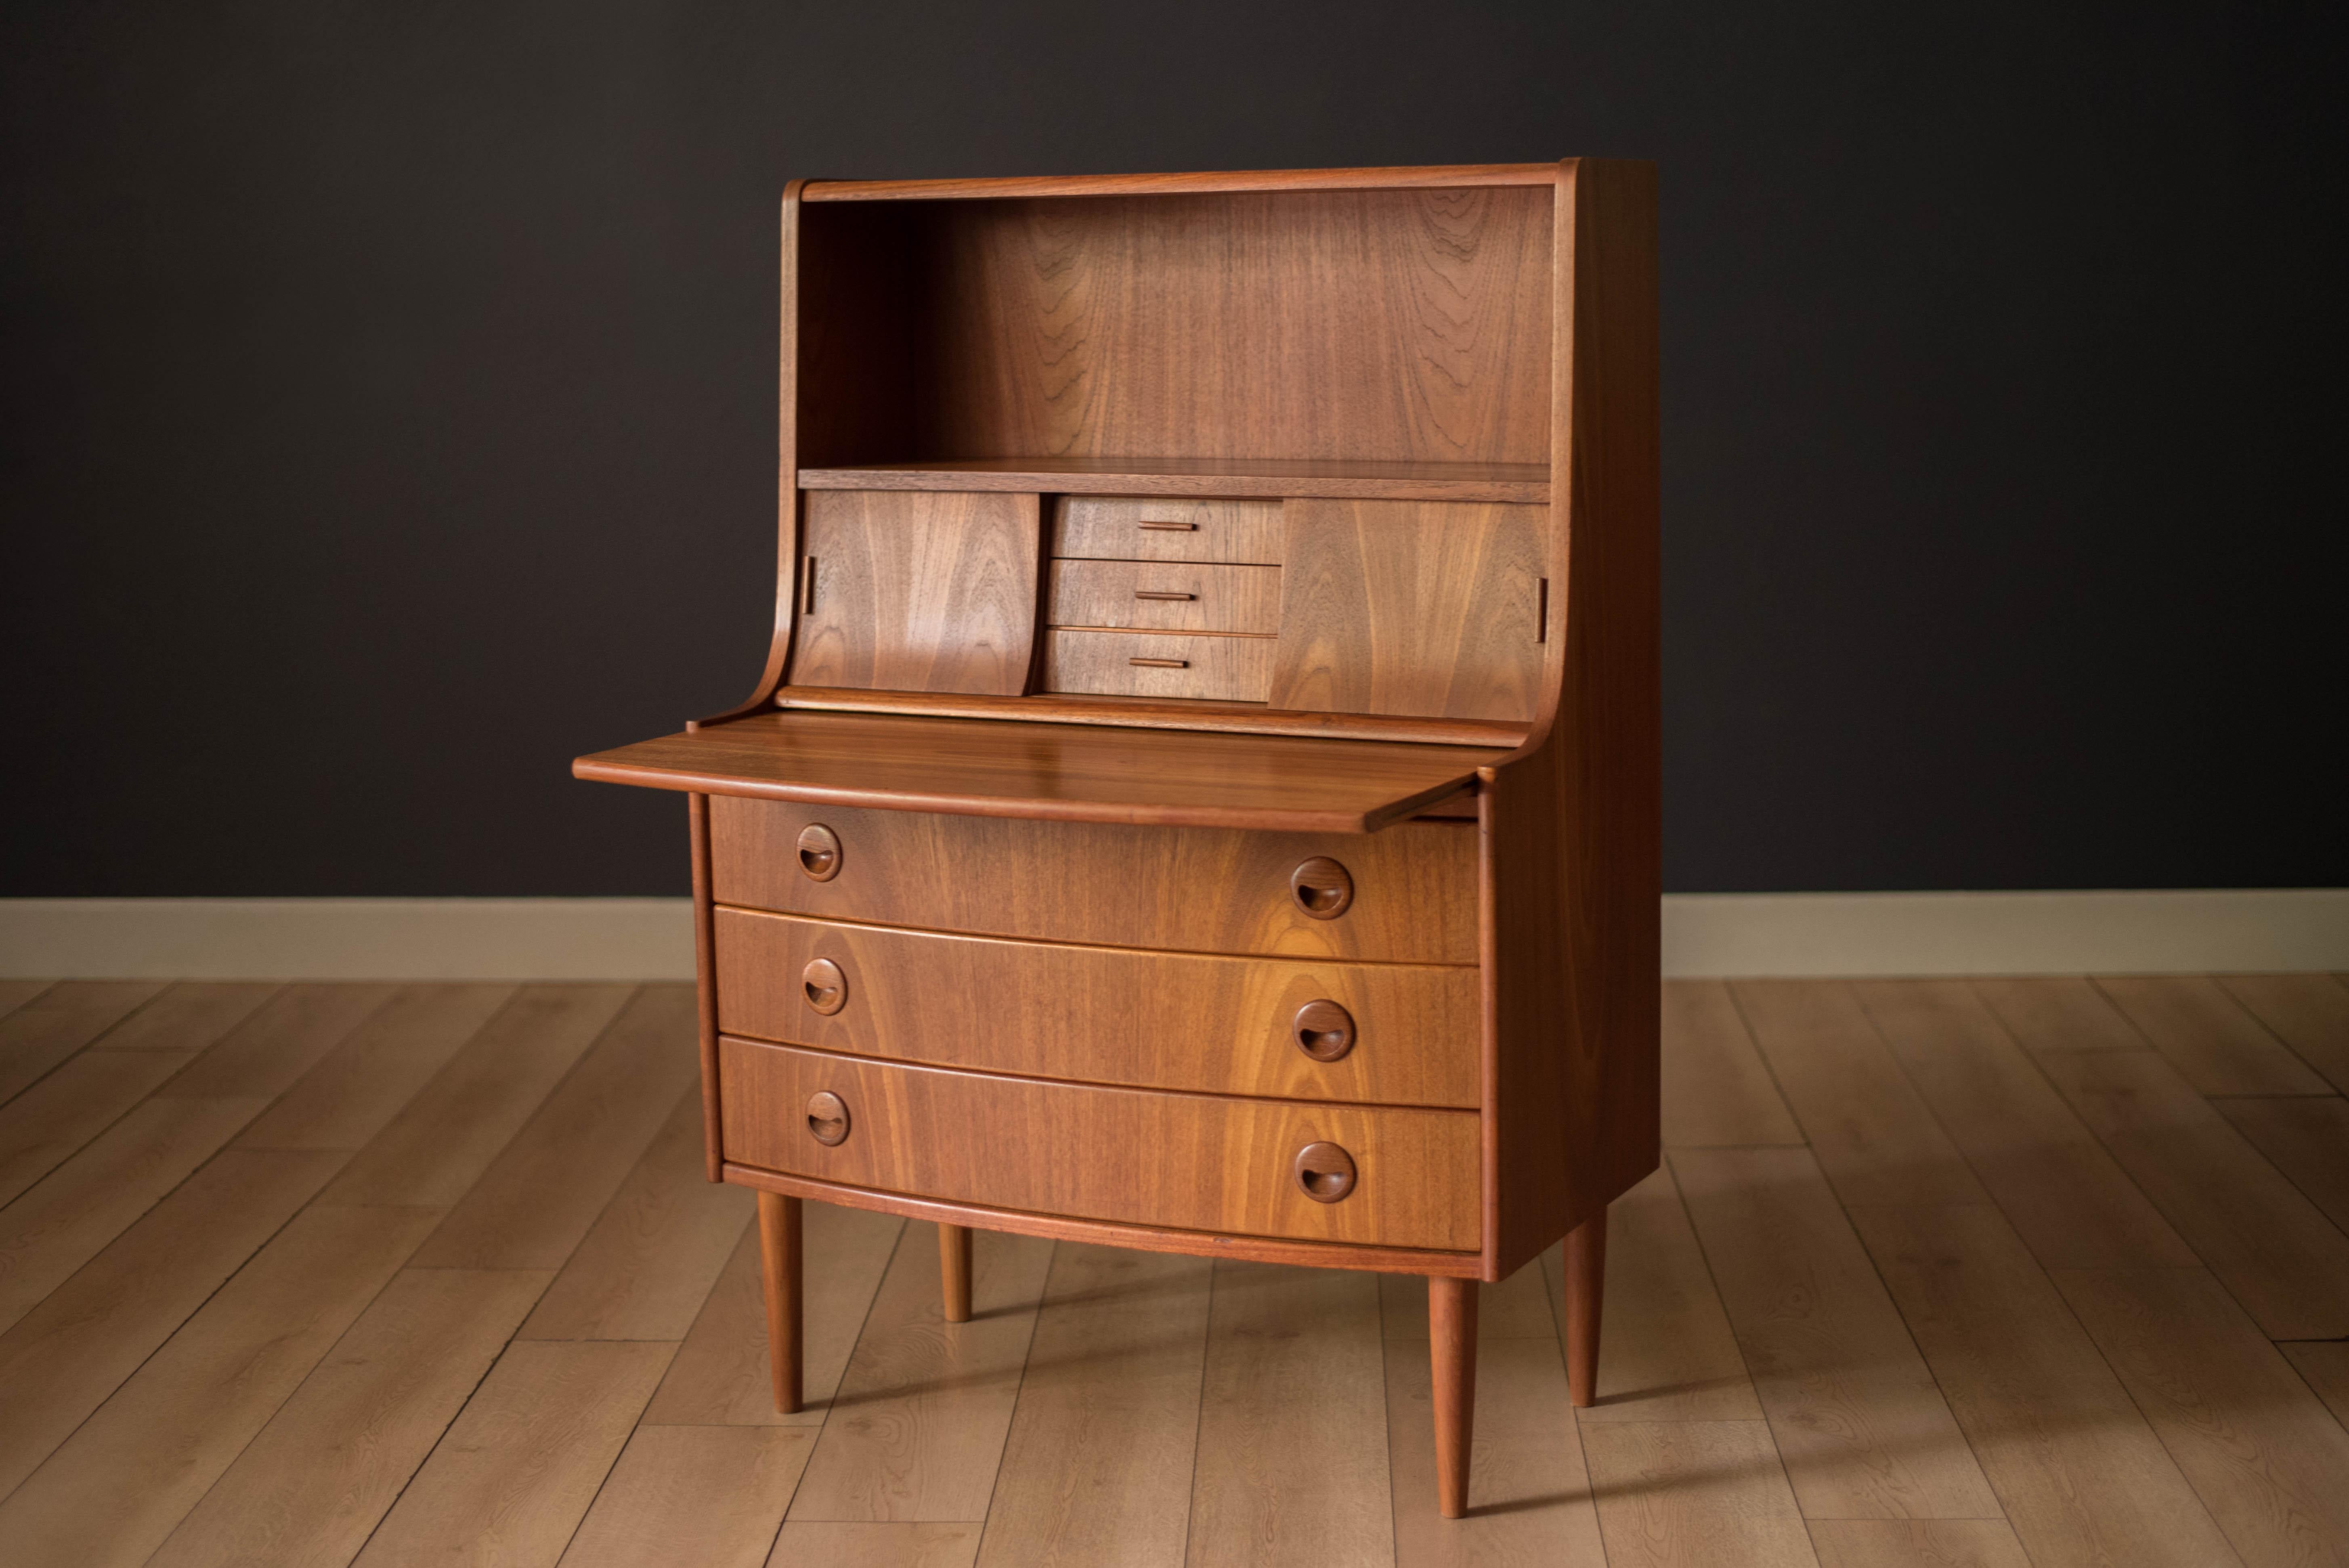 Mid-Century Modern secretary desk in teak circa 1960s, Denmark. Equipped with three deep storage drawers accented with sculpted wood handles. Features a slide out work desktop and includes a hutch with open compartments plus three additional small